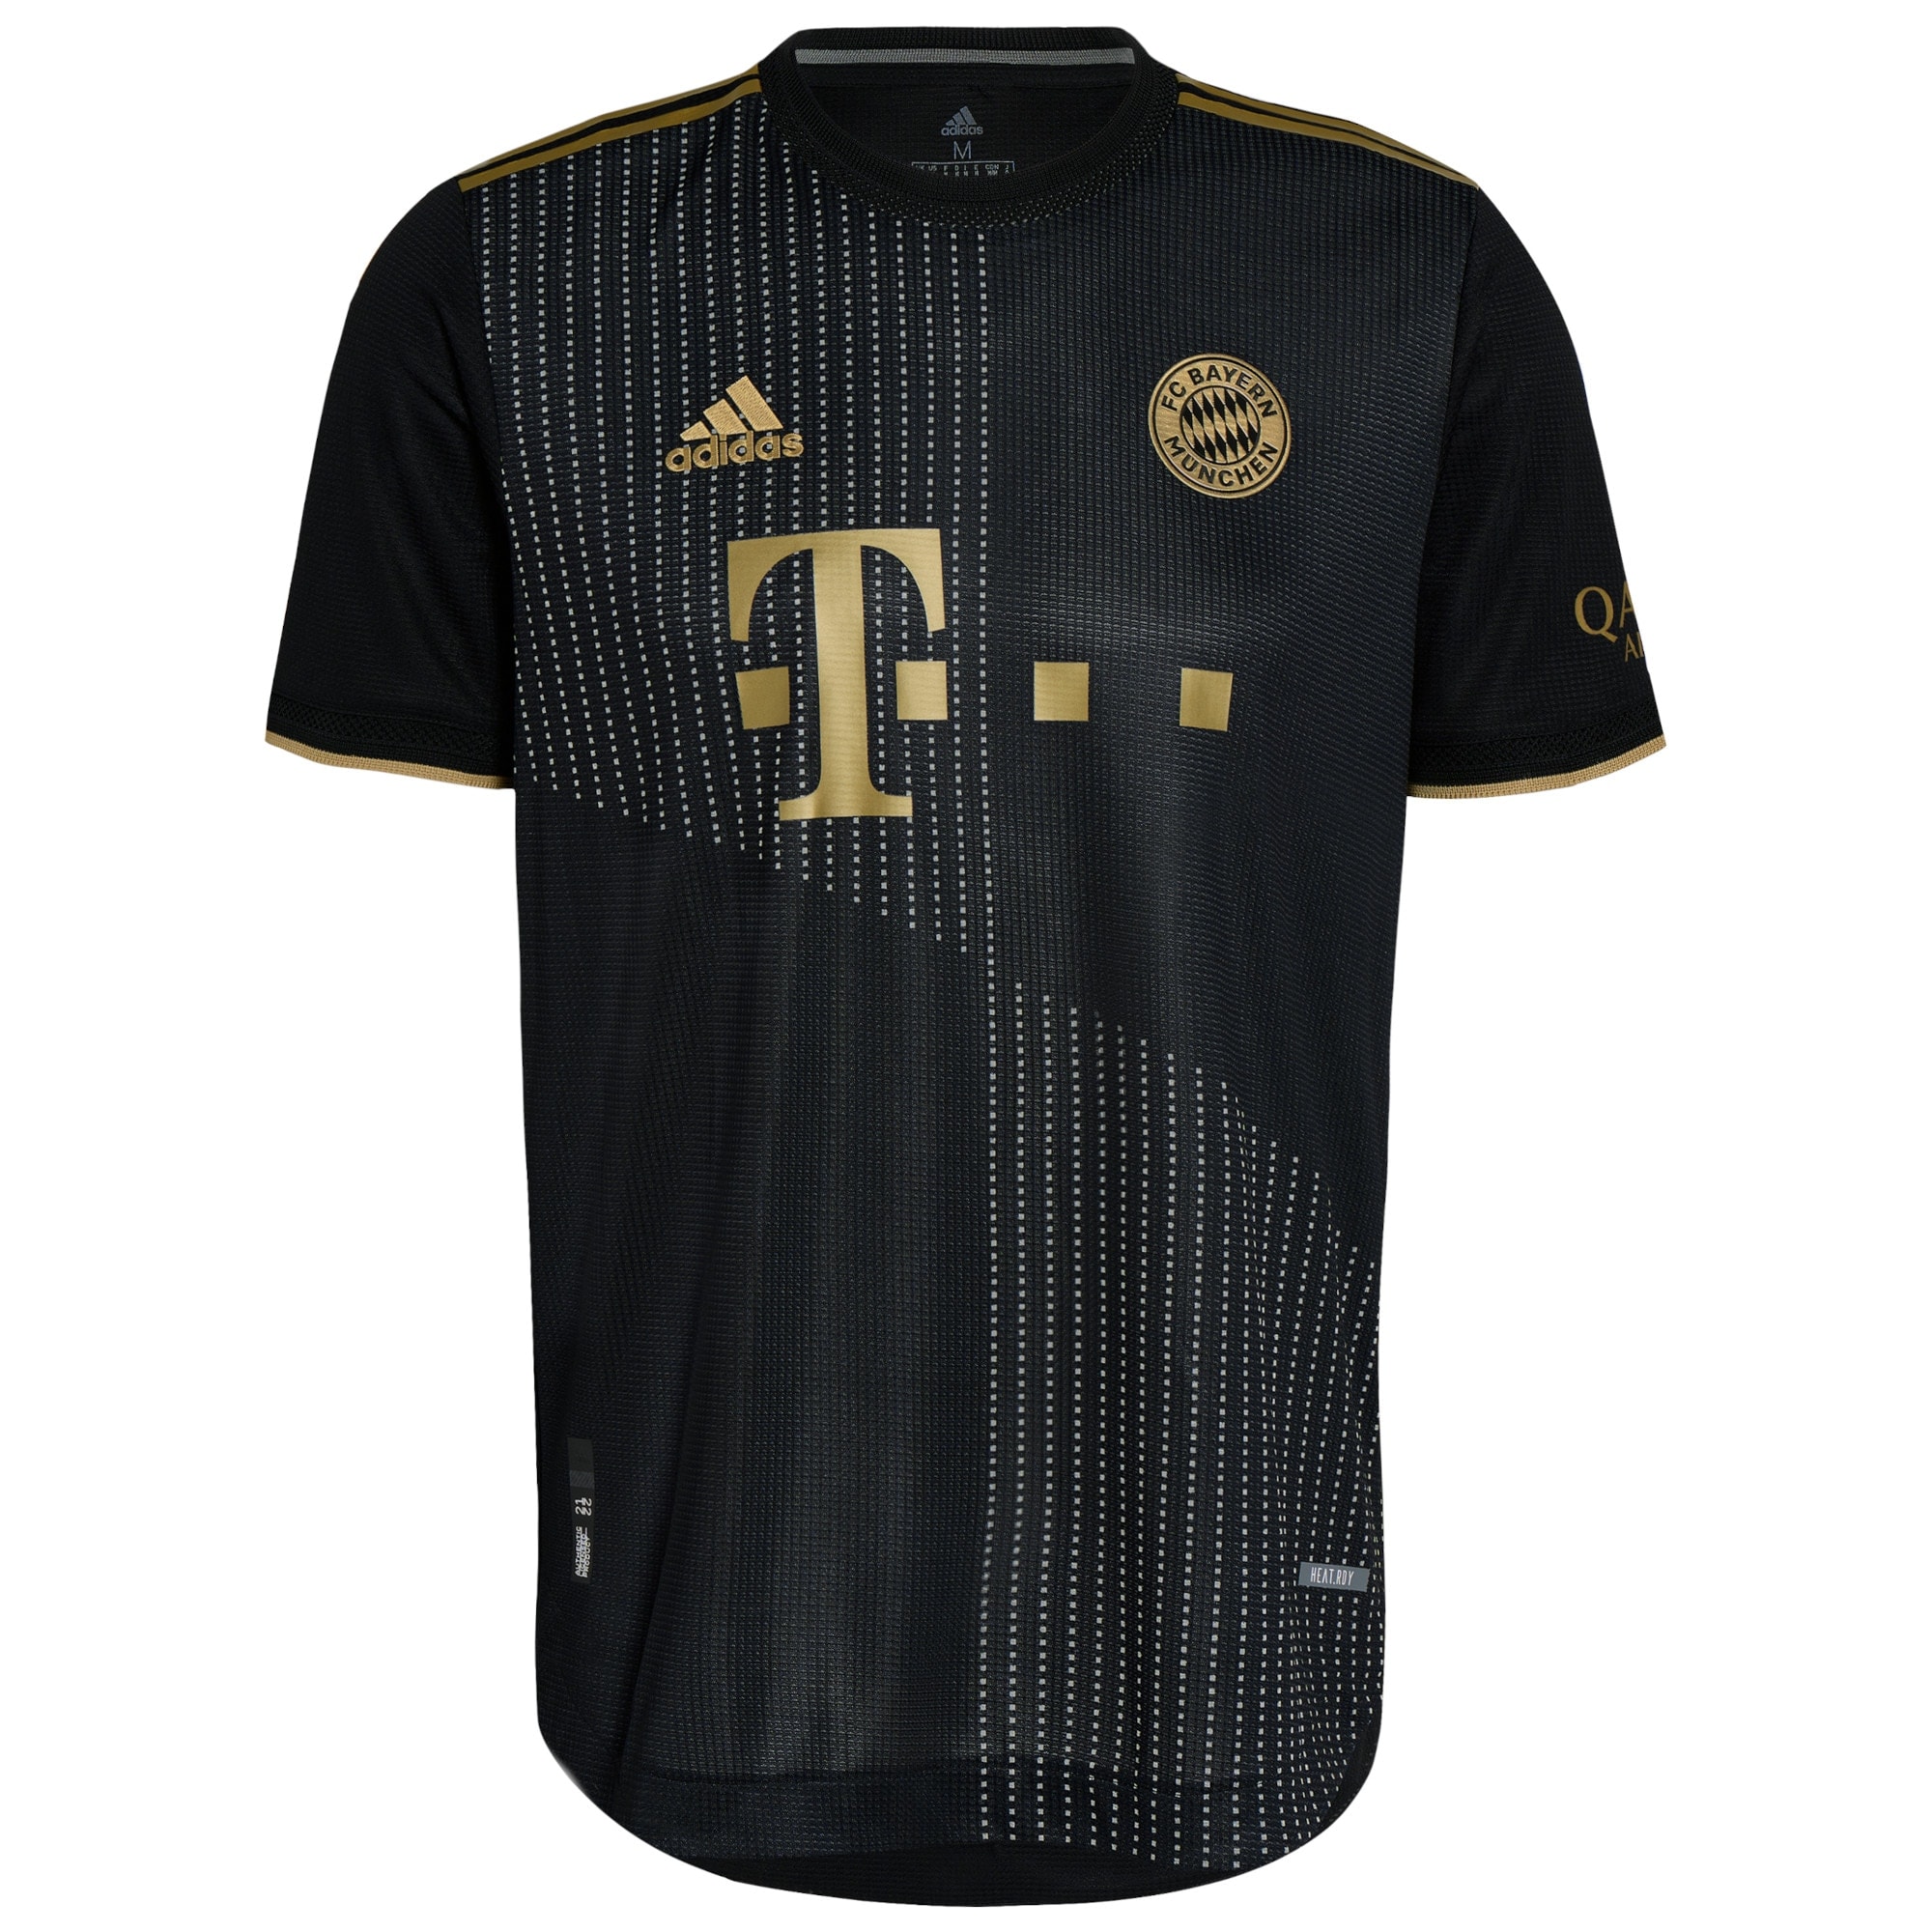 FC Bayern Away Authentic Shirt 2021-22 with Sabitzer 18 printing